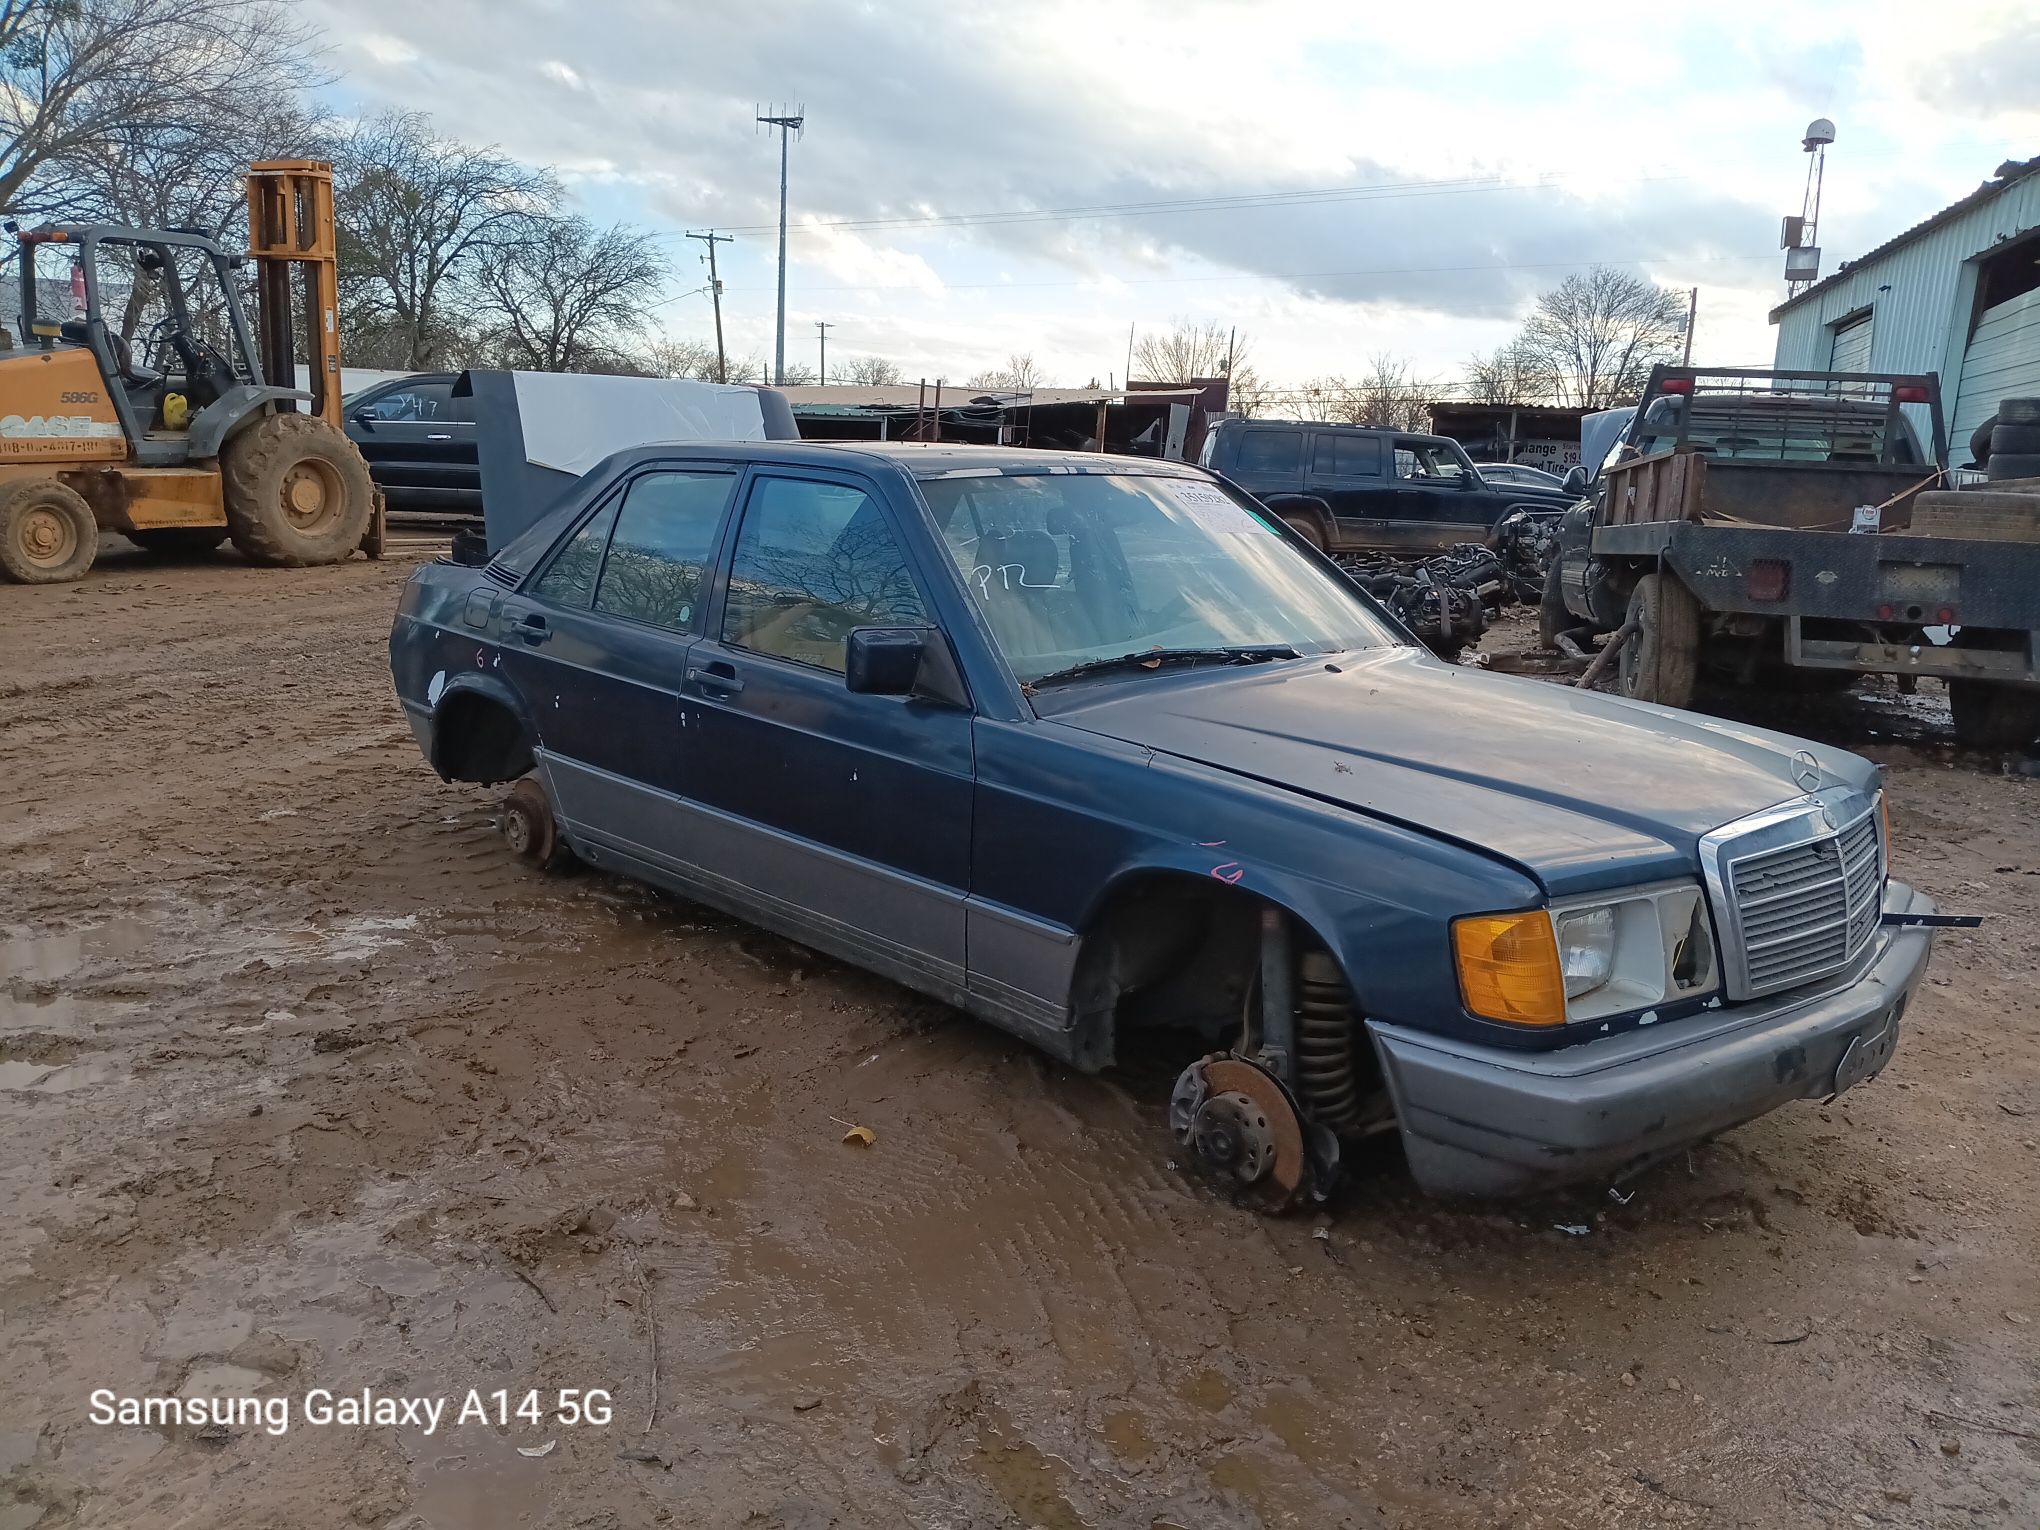 1984 Mercedes 190 - Parts Only #AB7